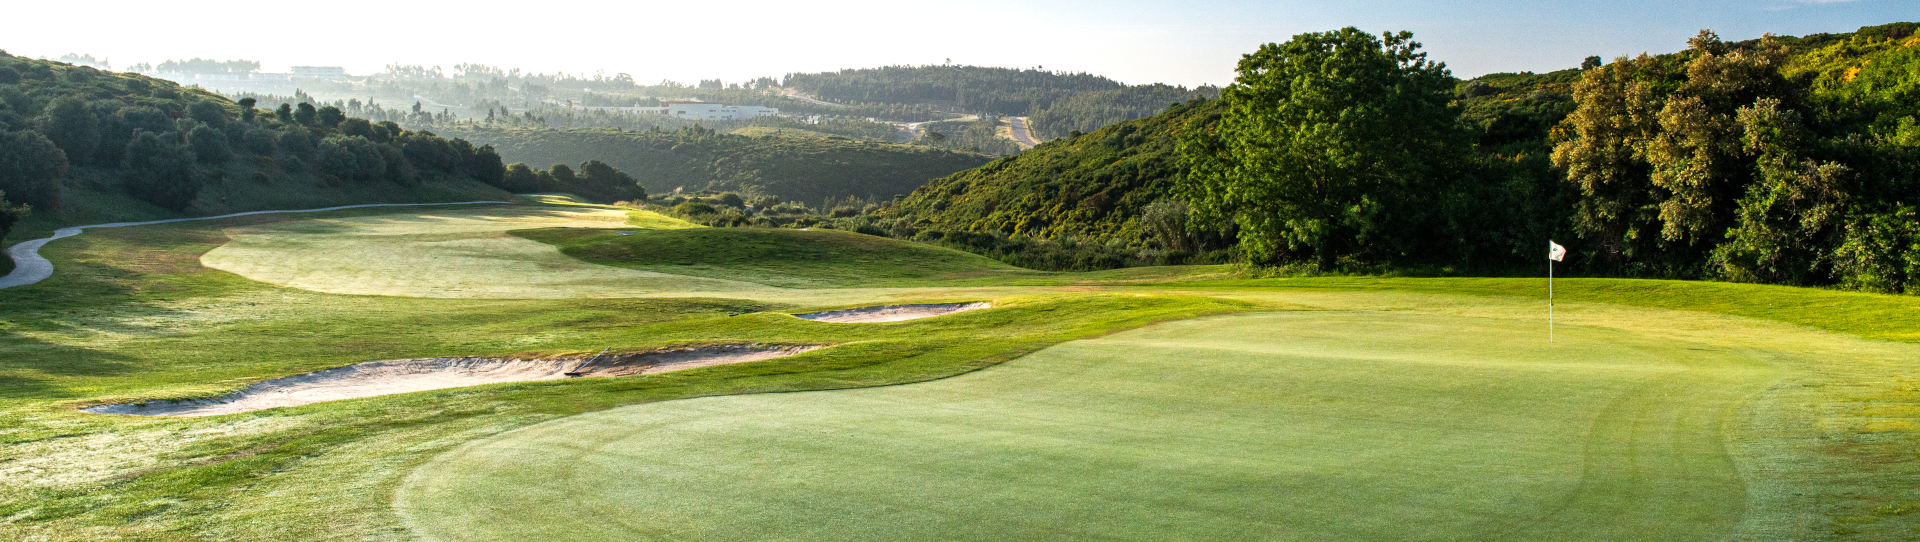 Portugal golf courses - Belas Clube Campo - Photo 3